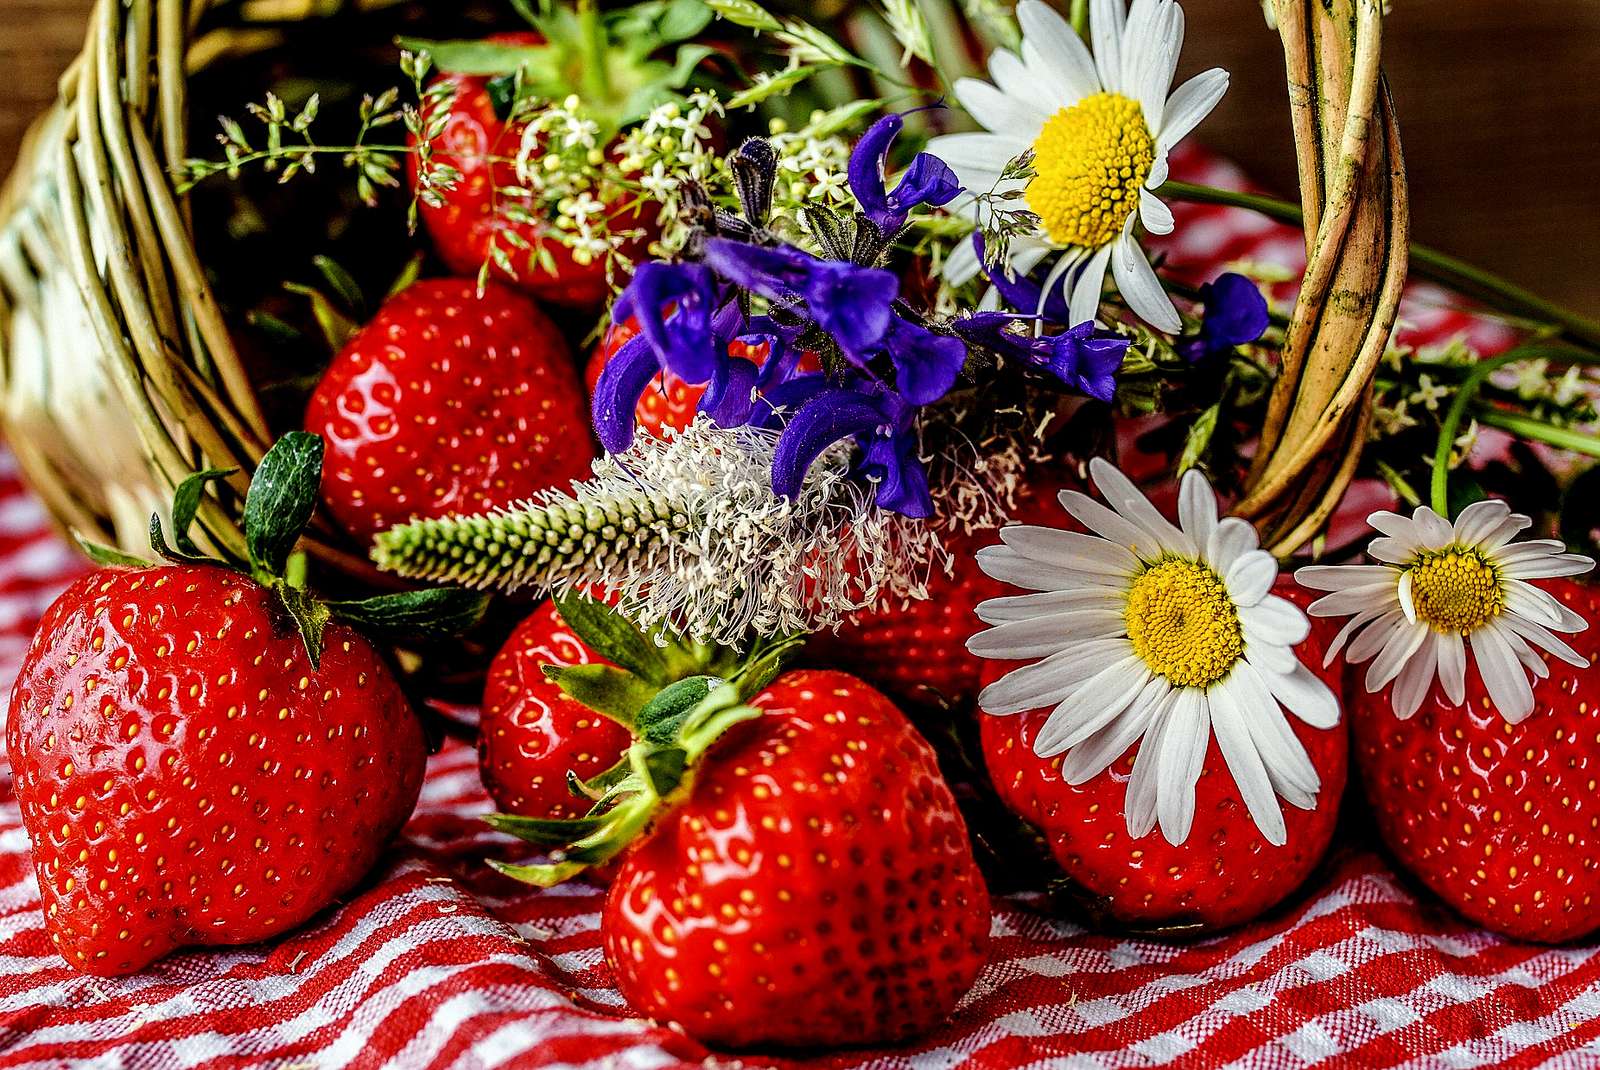 Flower-strawberry composition jigsaw puzzle online